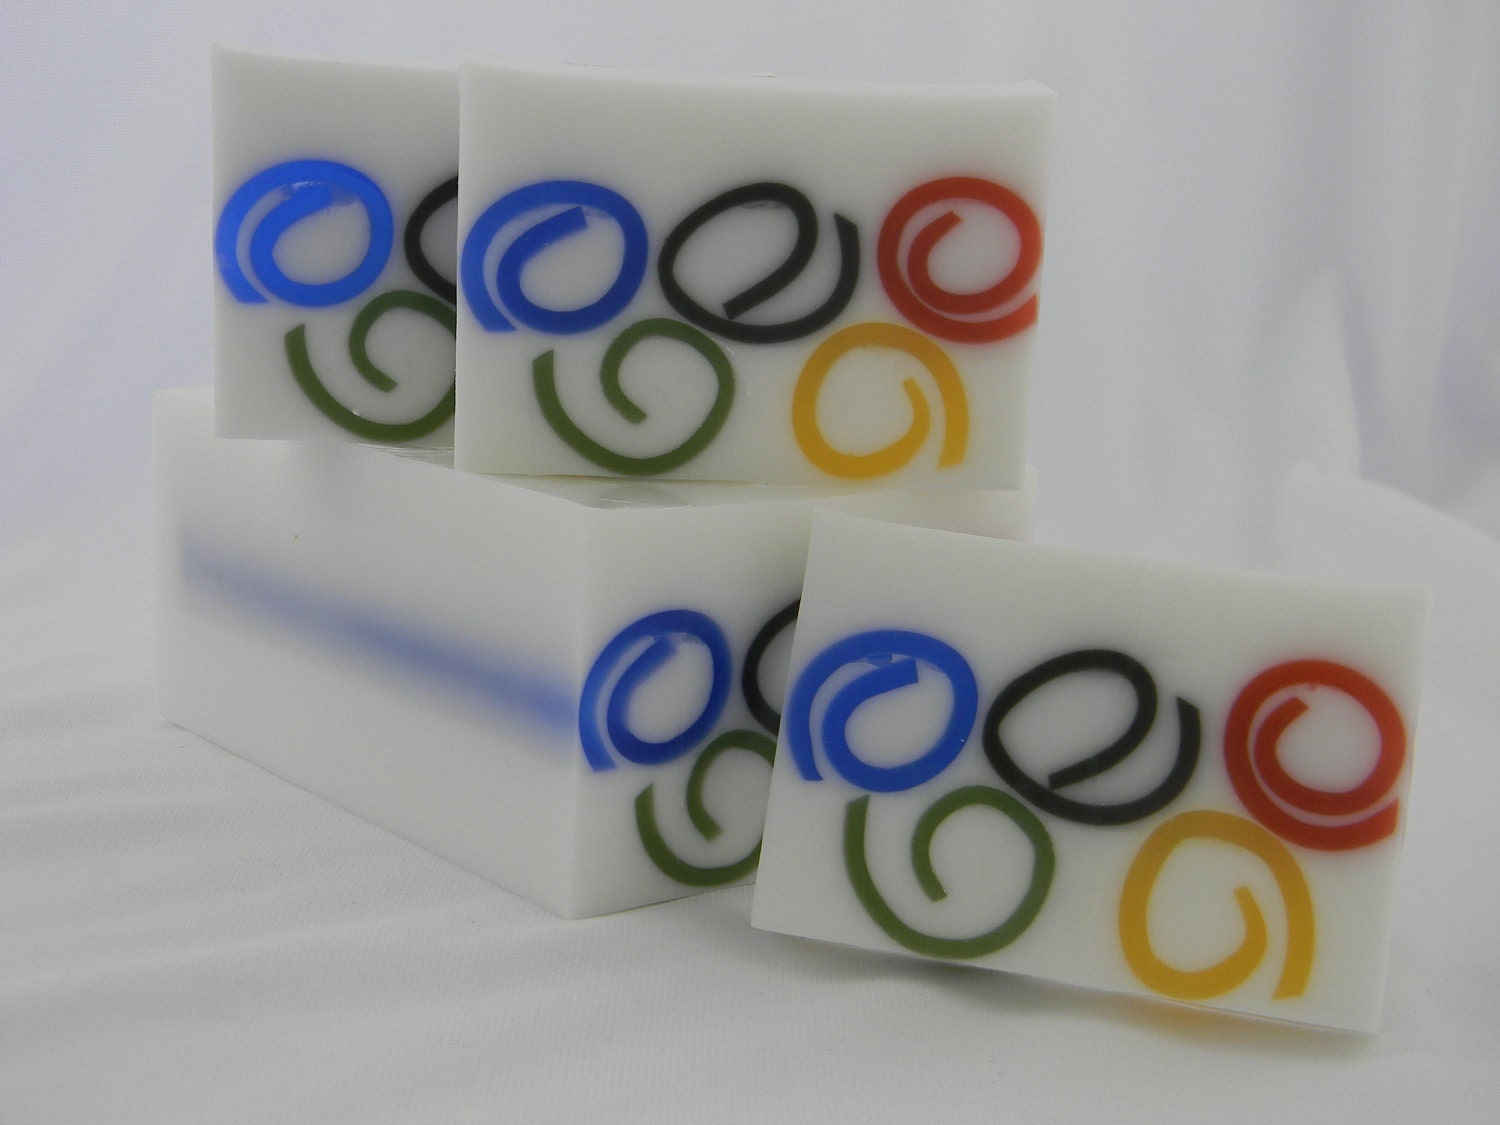 Olympic Rings inspired Soap - London Olympics - special olympics - 2012 olympics - olympics party